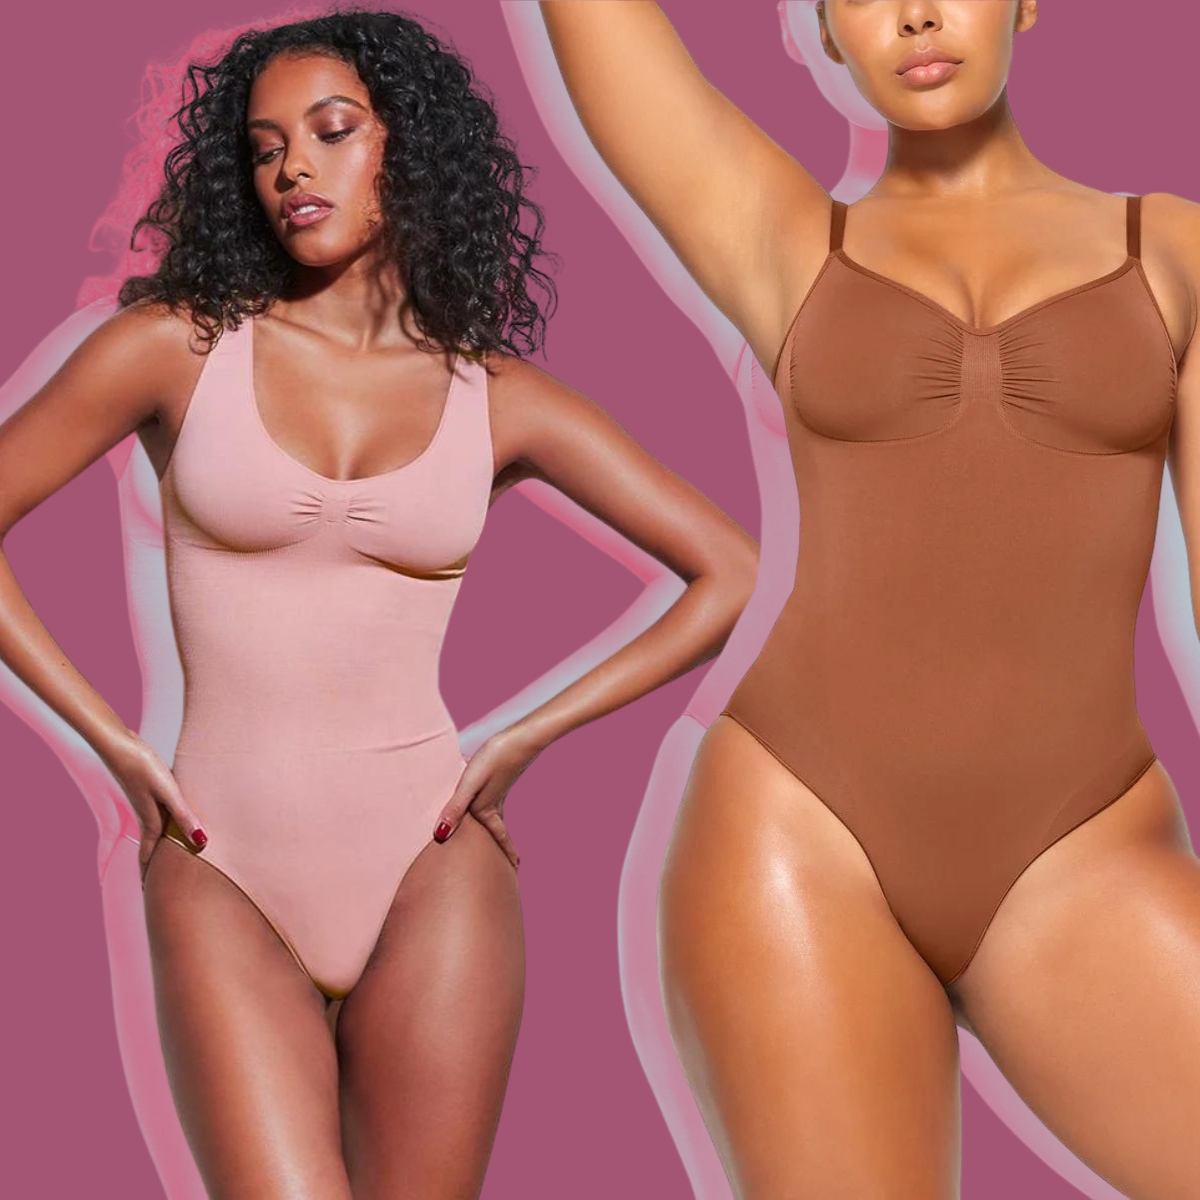 Shop Shapewear Backless Dress with great discounts and prices